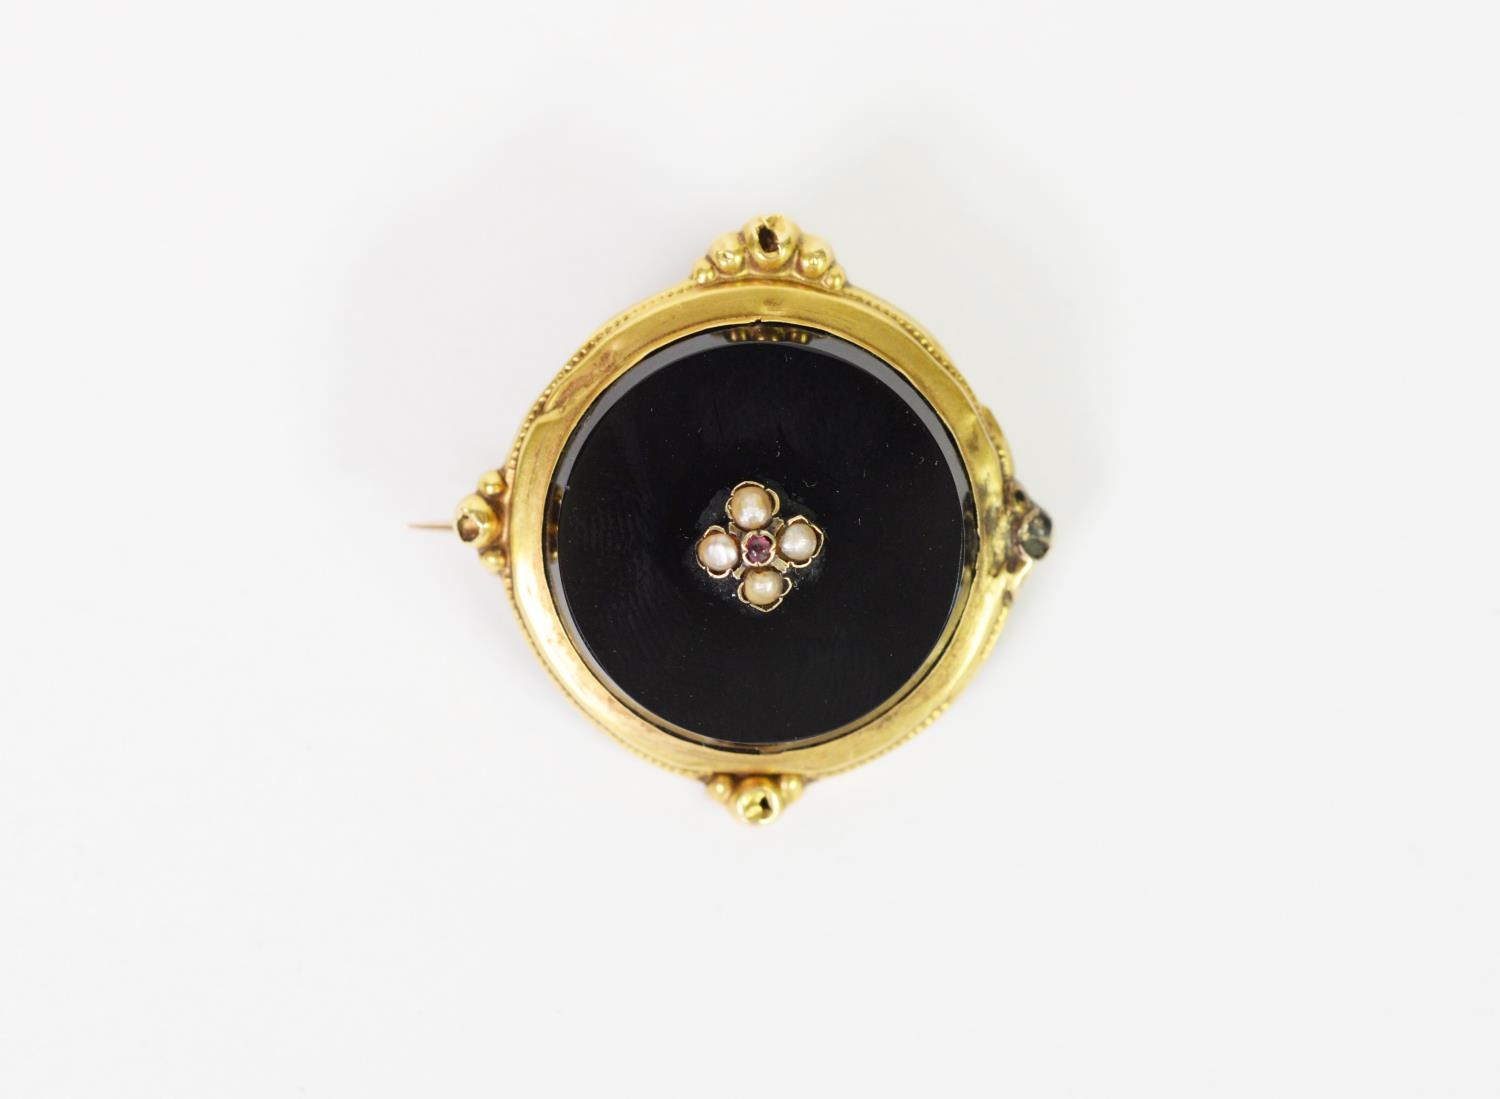 VICTORIAN CIRCULAR BLACK ONYX BROOCH, the centre overlaid with a small cluster of four seed pearls